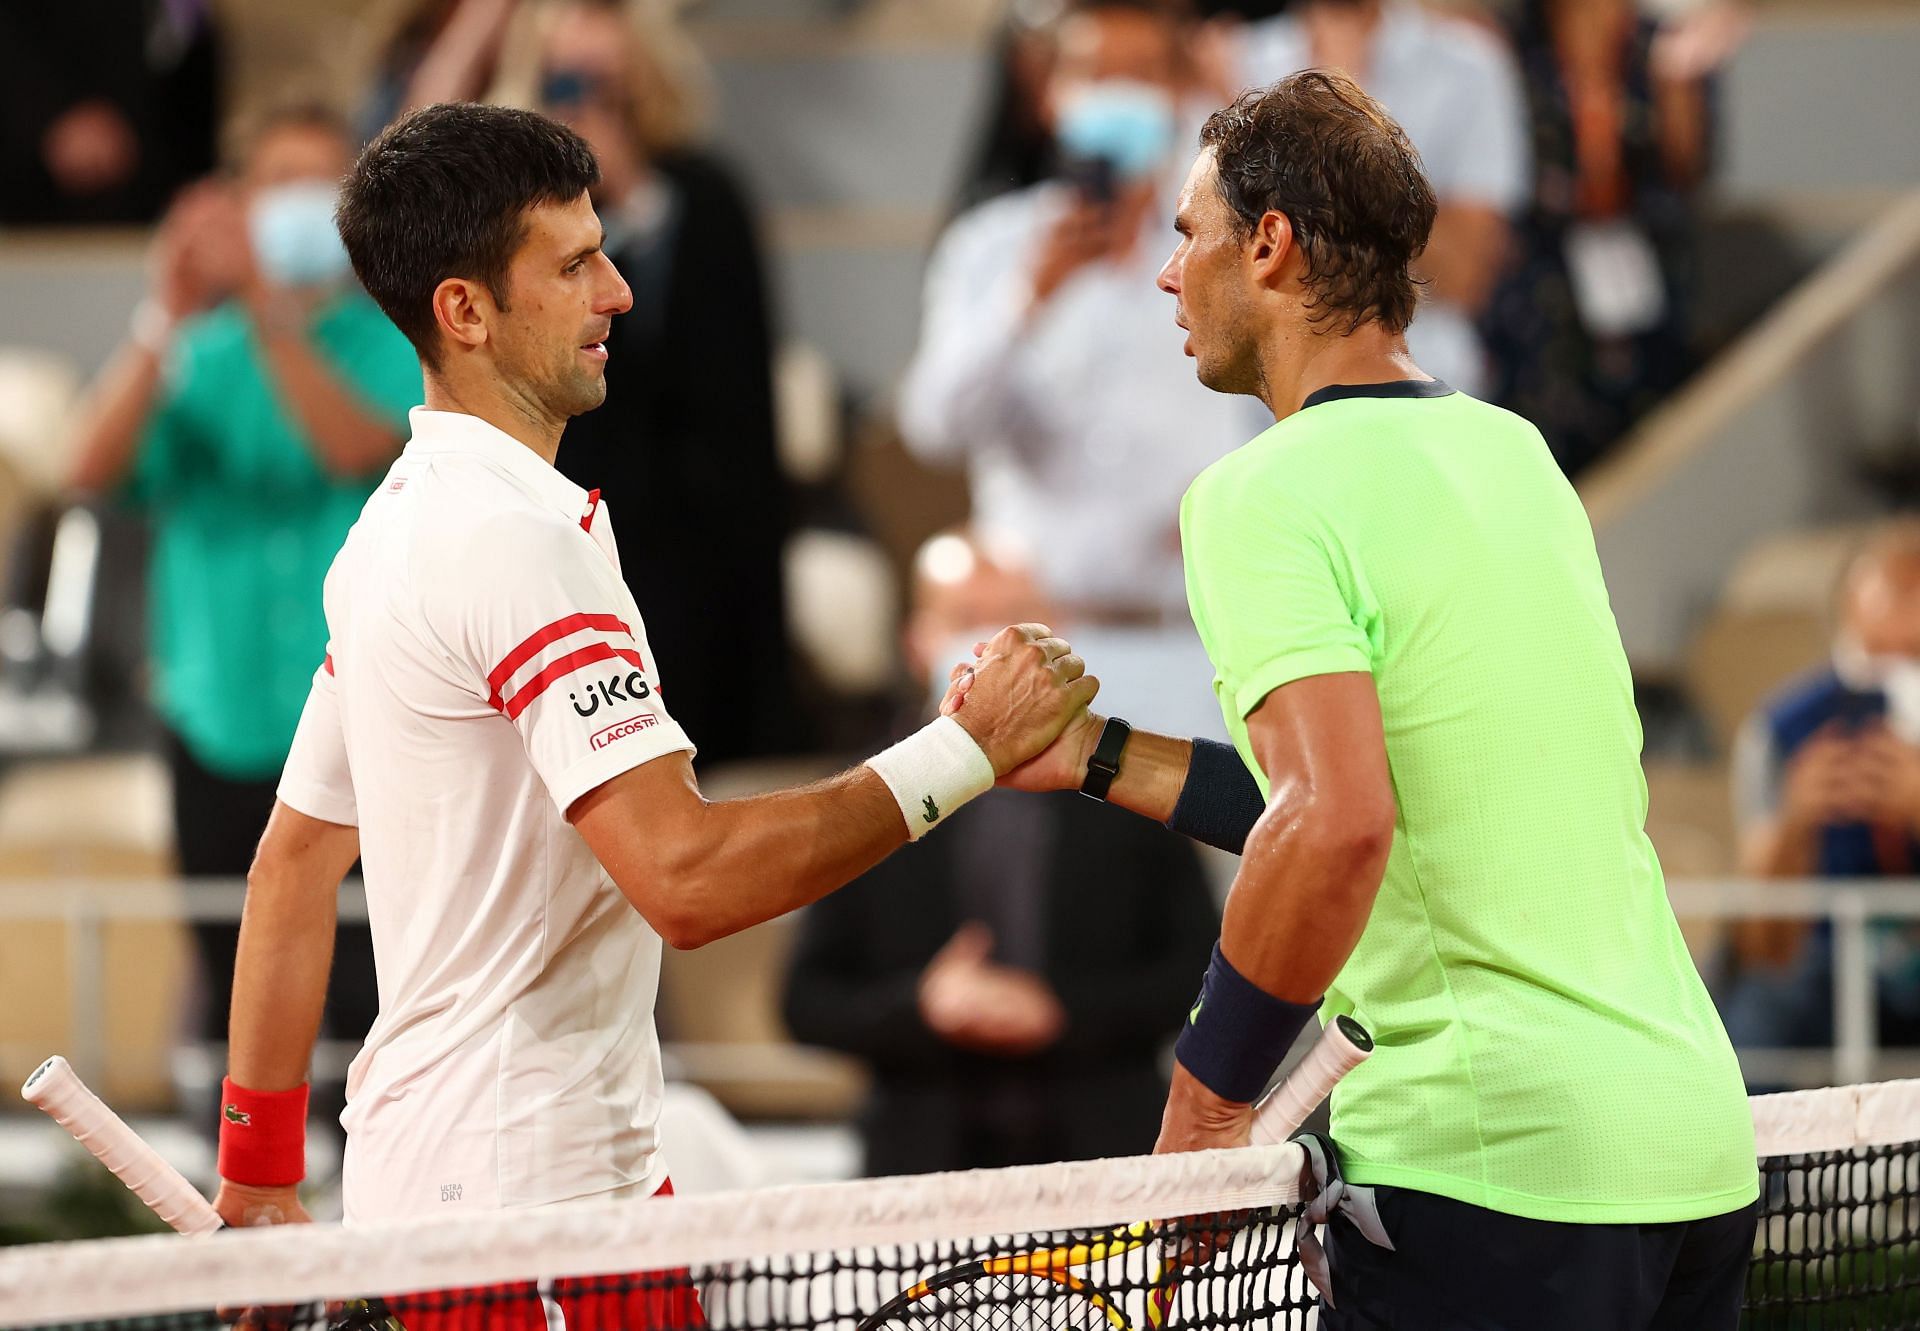 Nadal lost the 2021 French Open semifinal against Novak Djokovic